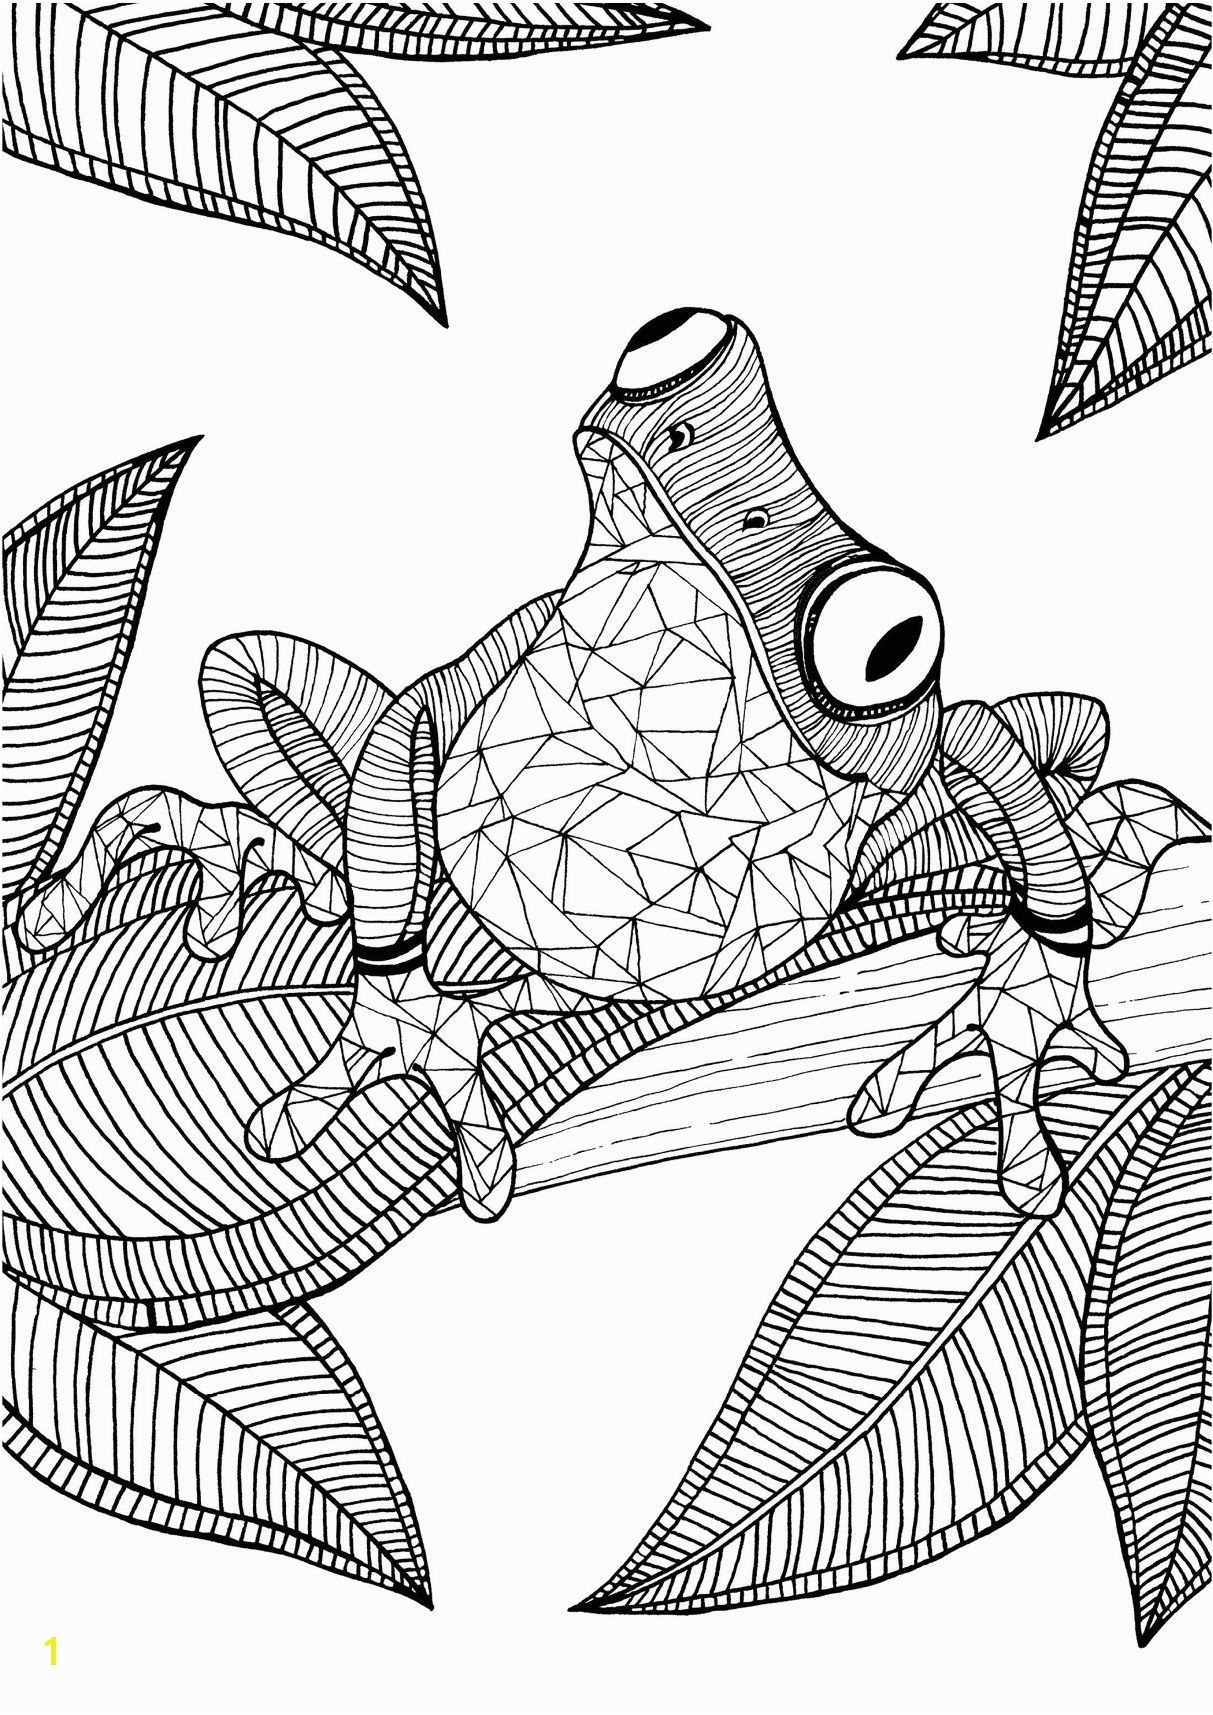 Coloring Pages Of Tree Frogs Frog Adult Colouring Page Colouring In Sheets Art & Craft